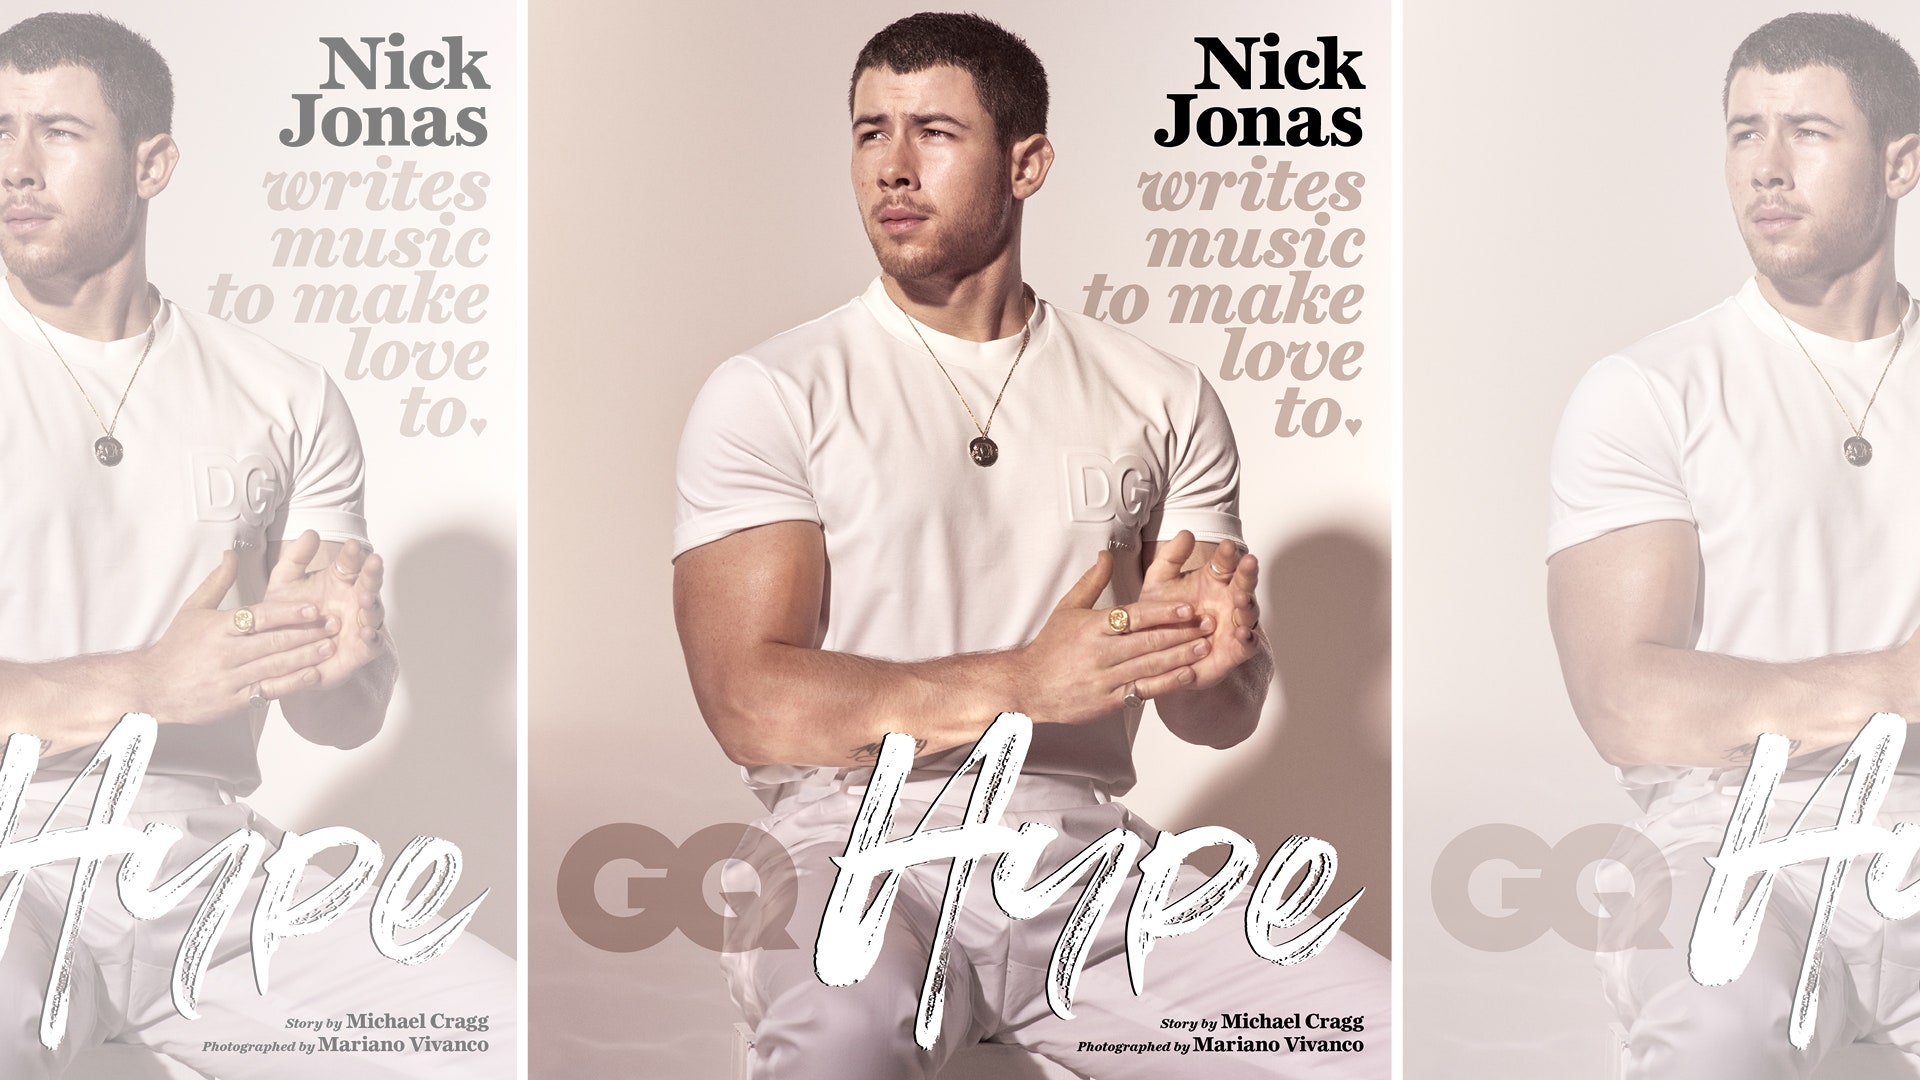 Nick Jonas knows you play his music when lovemaking